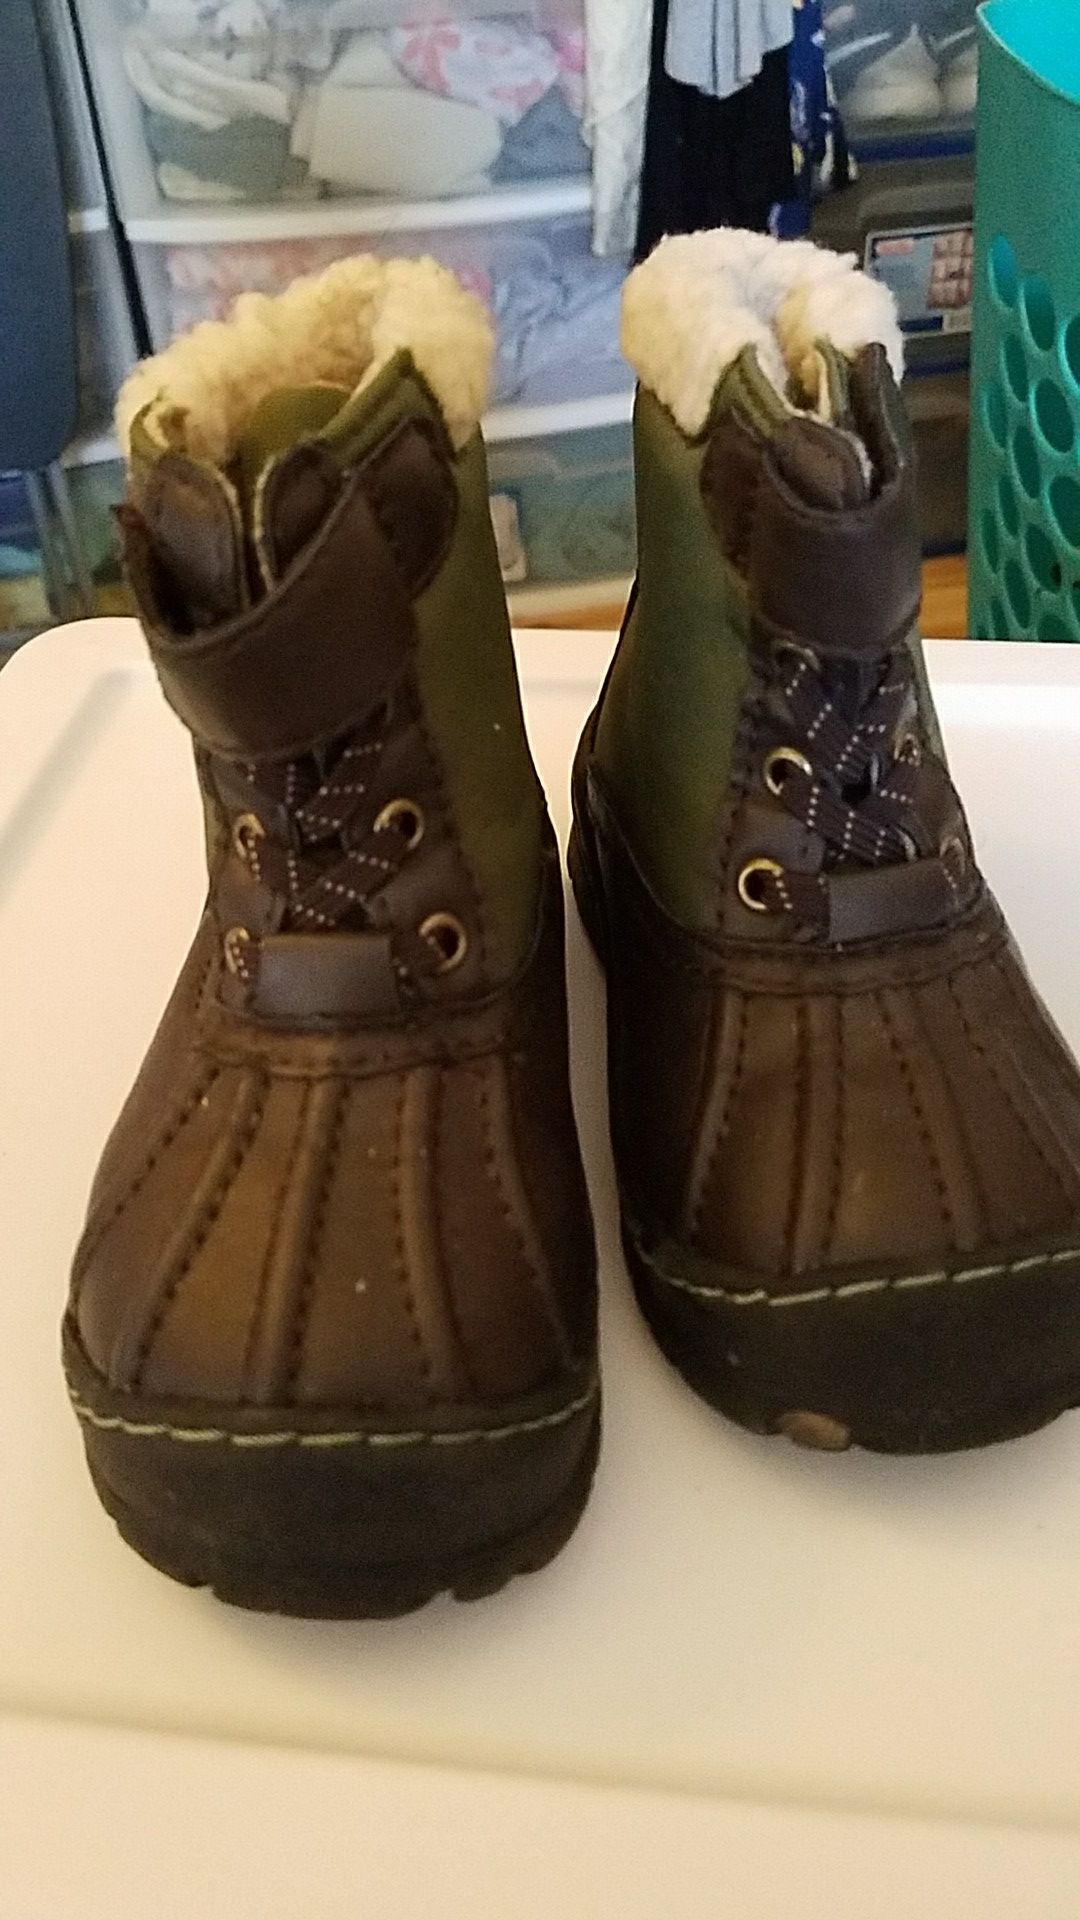 Toddler snow boots size 7